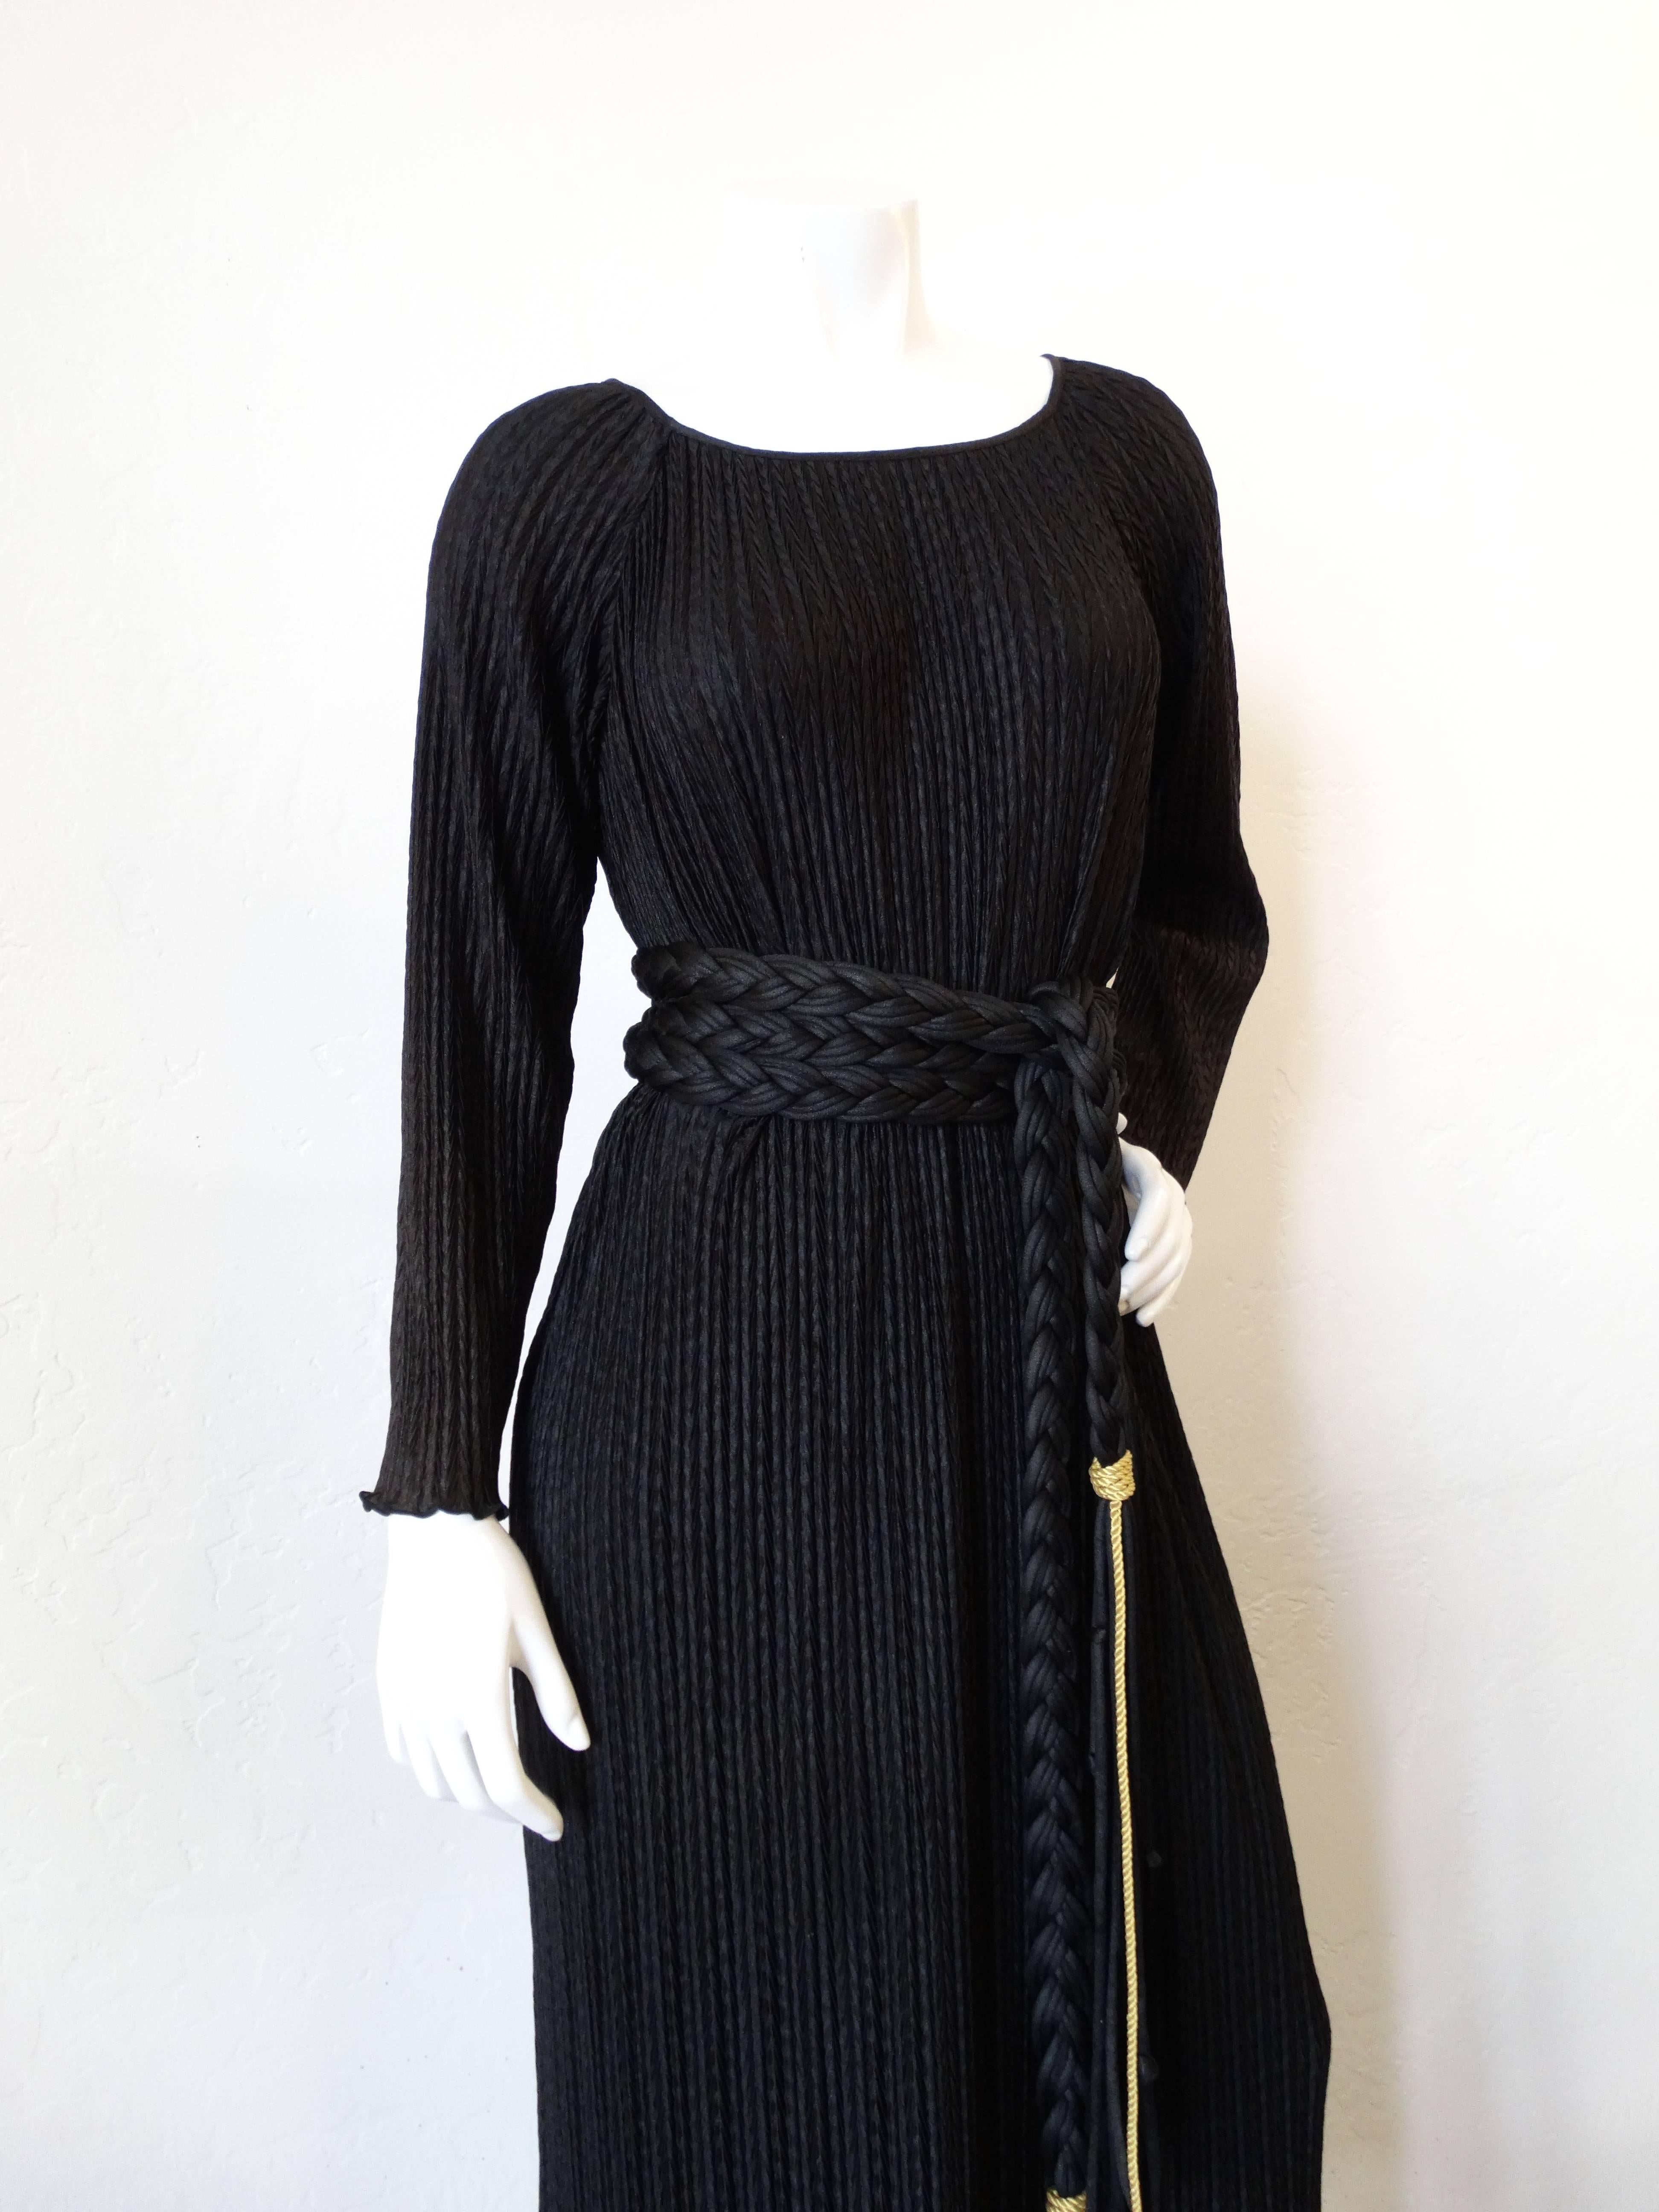 Incredible 1970s gown from designer Mary McFadden! Made out of soft and silky black fabric with Fortuny pleating. Grecian style with incredible wrap around braided belt- accented with gold cord. Non-fitted tunic style, tiered bottom accented with